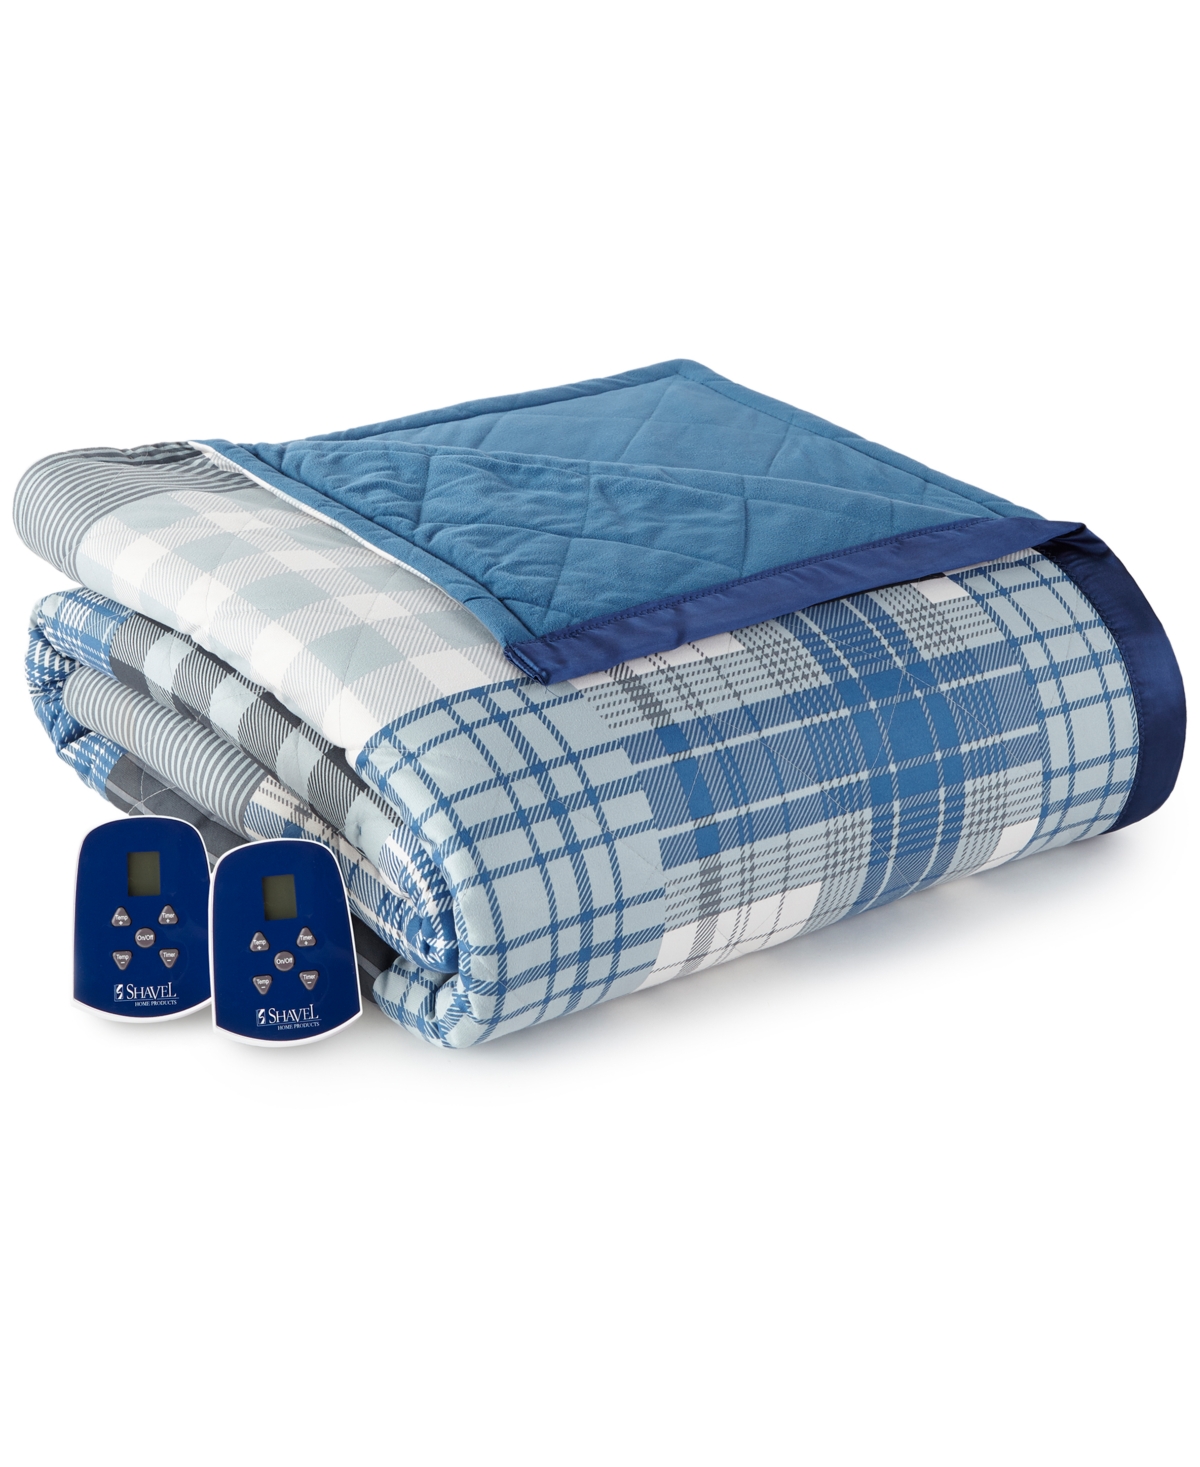 Shavel Micro Flannel 7 Layers Of Warmth Twin Electric Blanket Bedding In Smoke Mountain Plaid